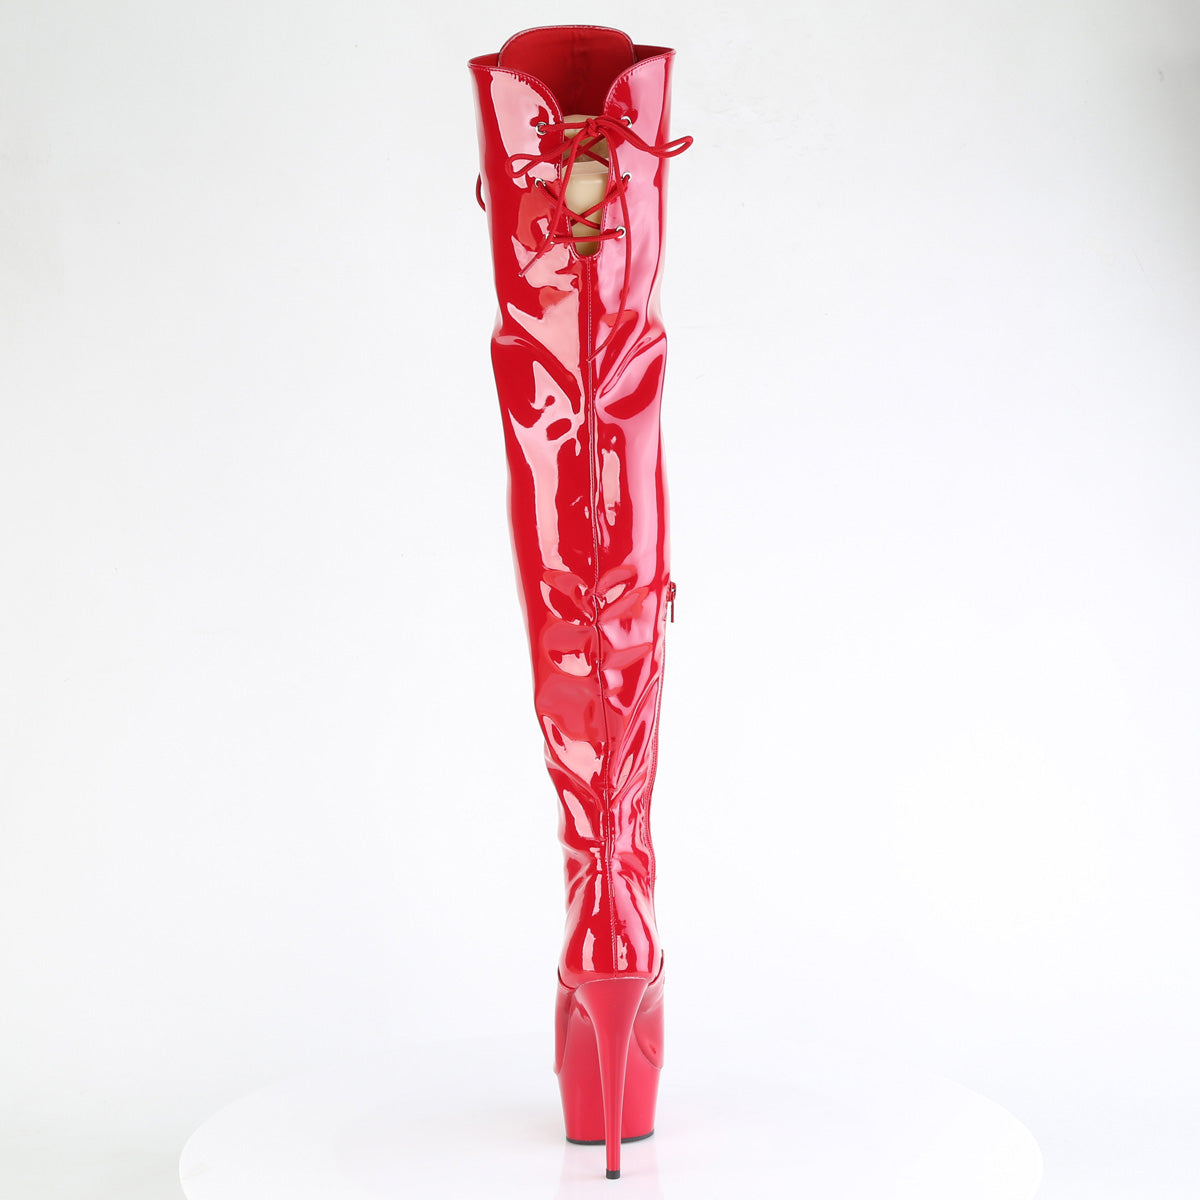 DELIGHT-3022 Pleaser Red Stretch Patent/Red Platform Shoes [Thigh High Boots]